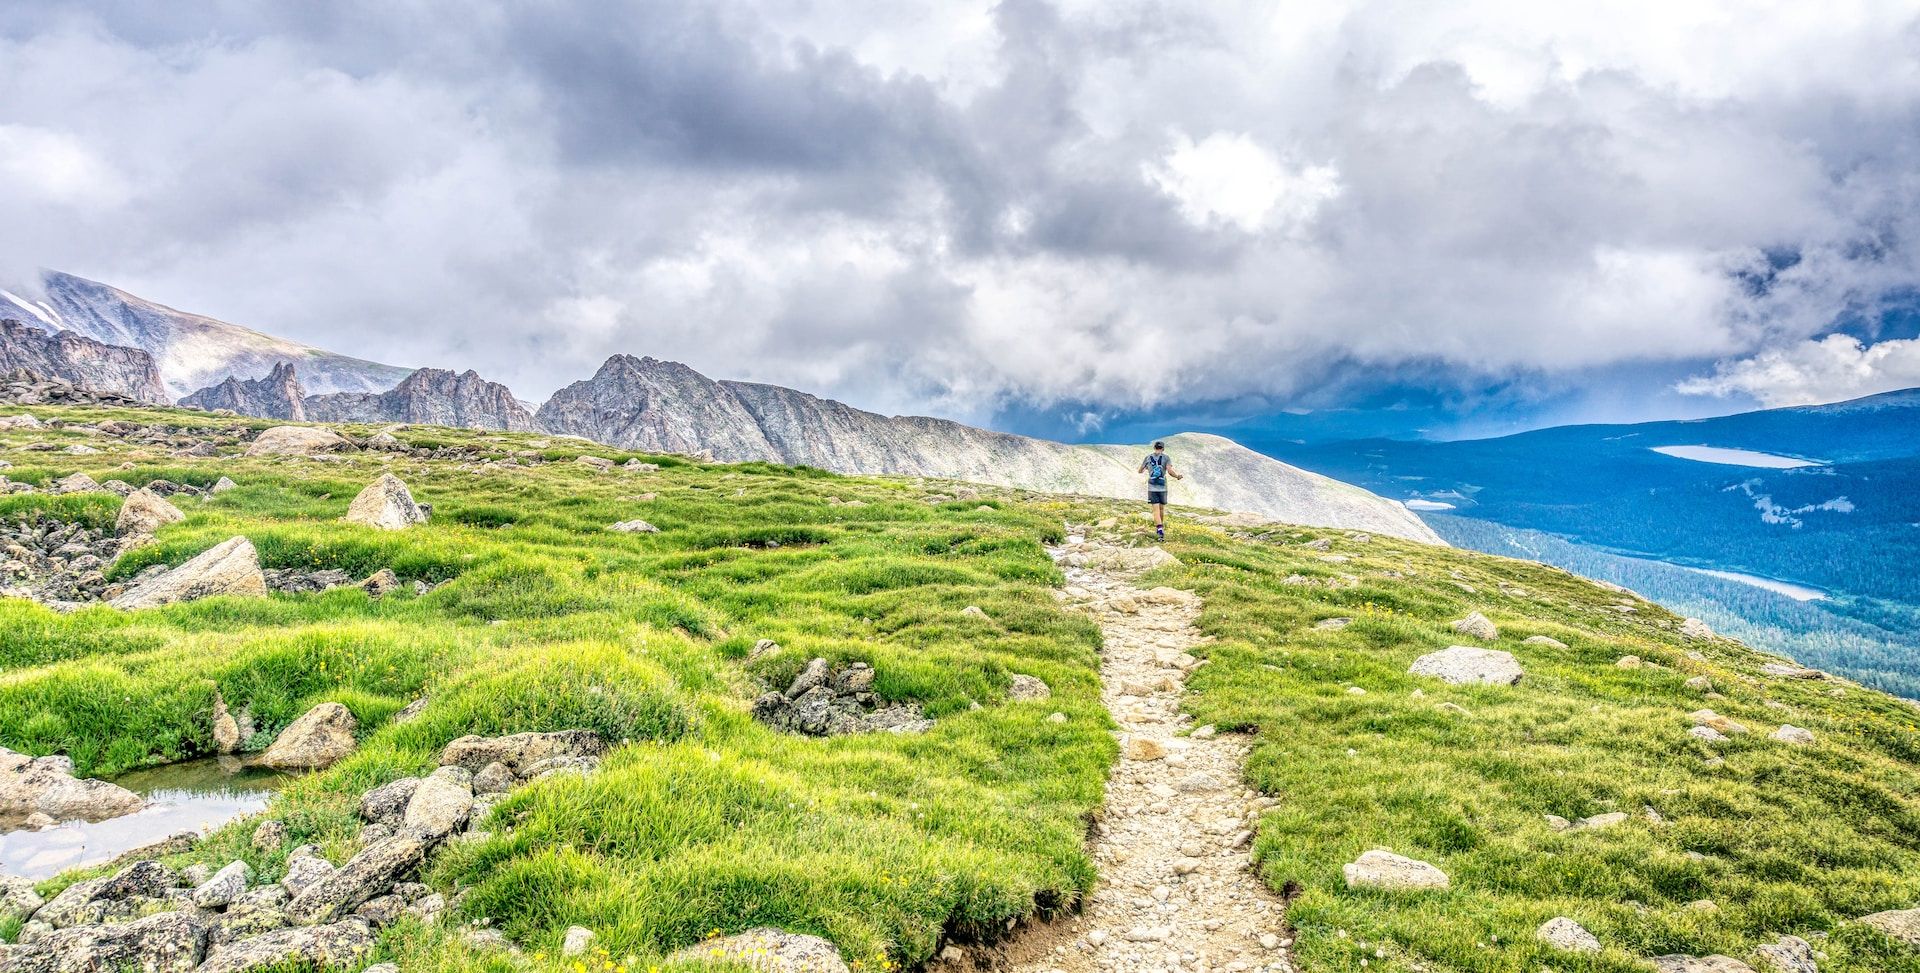 man running on a trail in the mountains under a cloudy sky